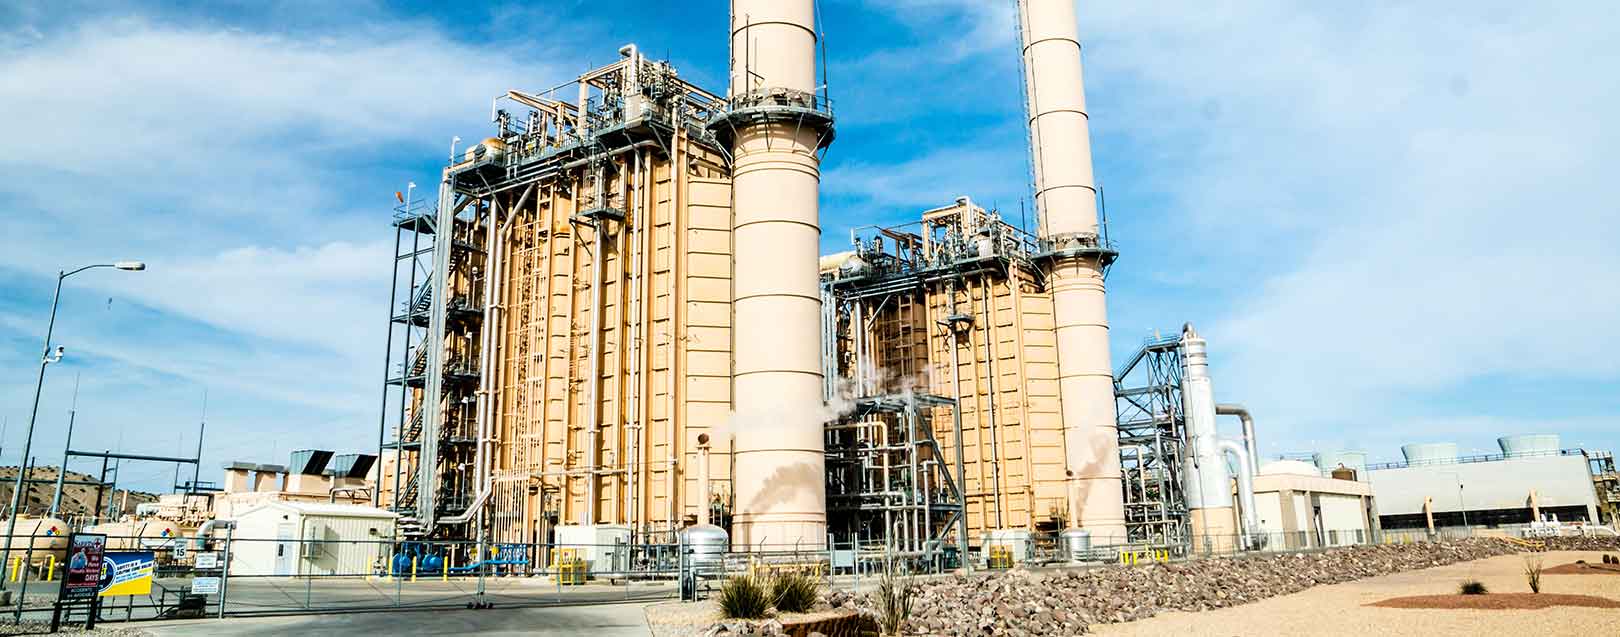 Essar Power plans to resume works at Hazira plant